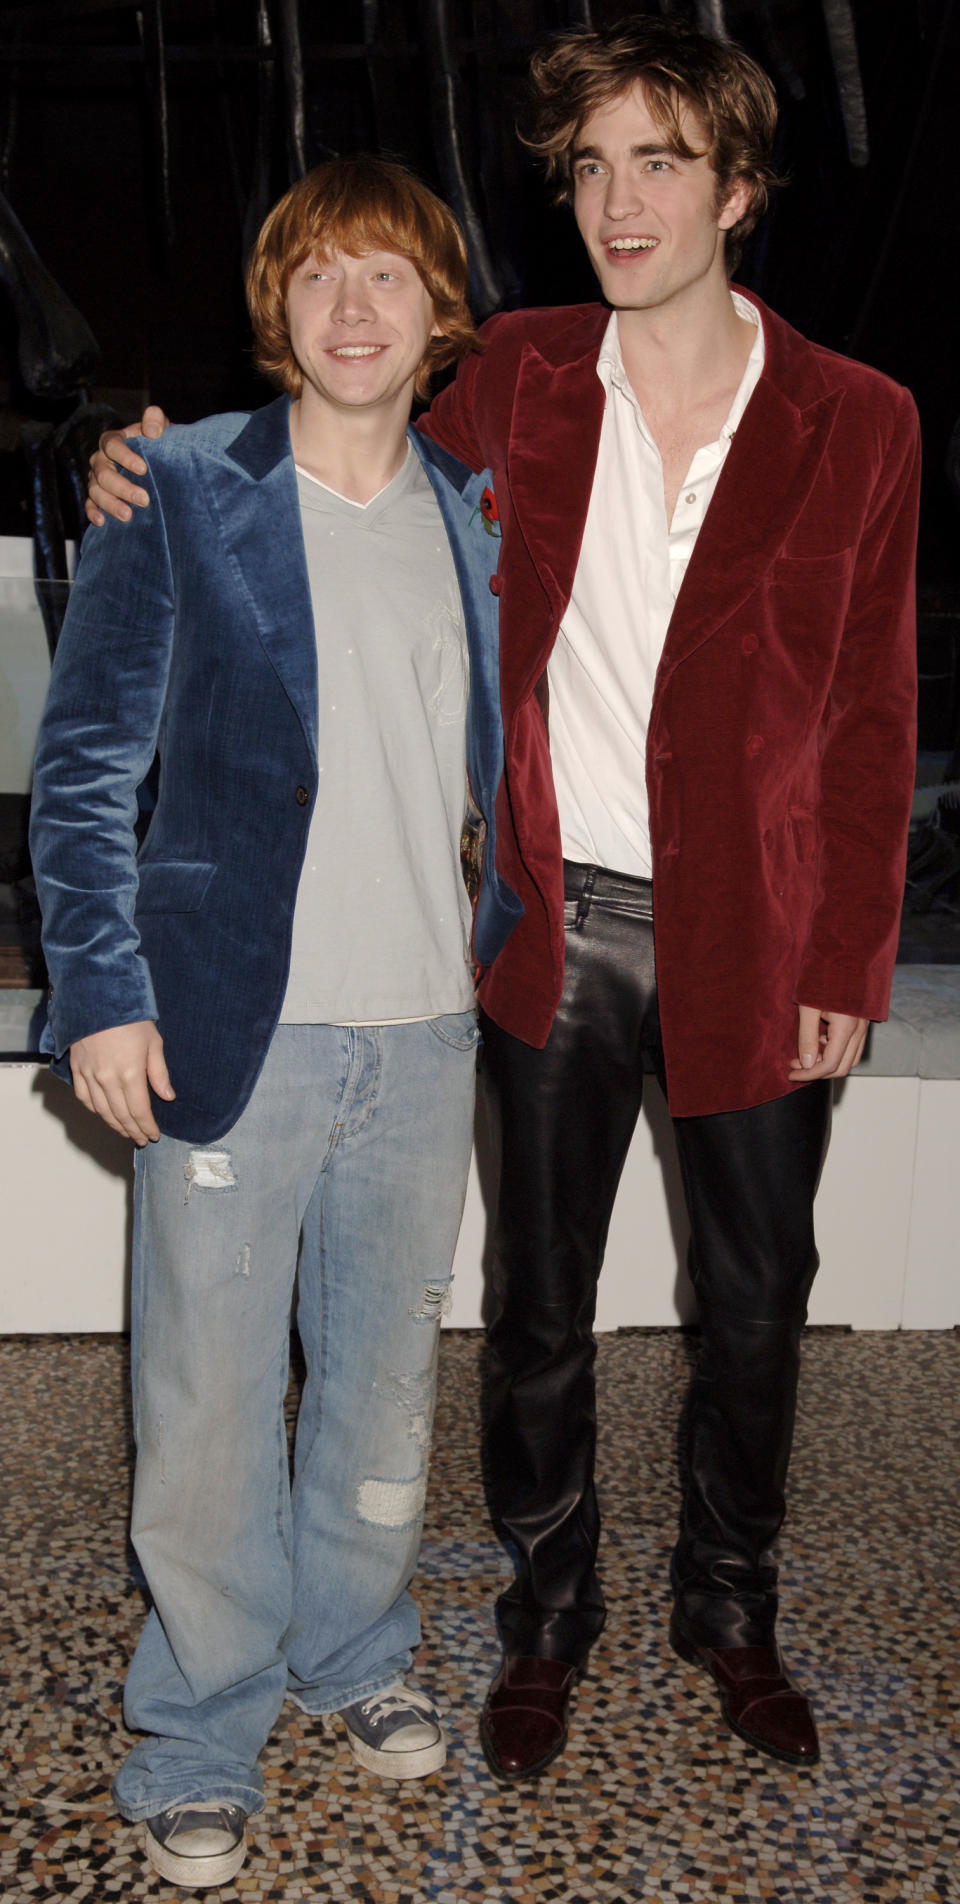 Rupert Grint (left) and Robert Pattinson during the aftershow party for the film 'Harry Potter and the Goblet of Fire', at the Natural History Museum, South Kensington, London.